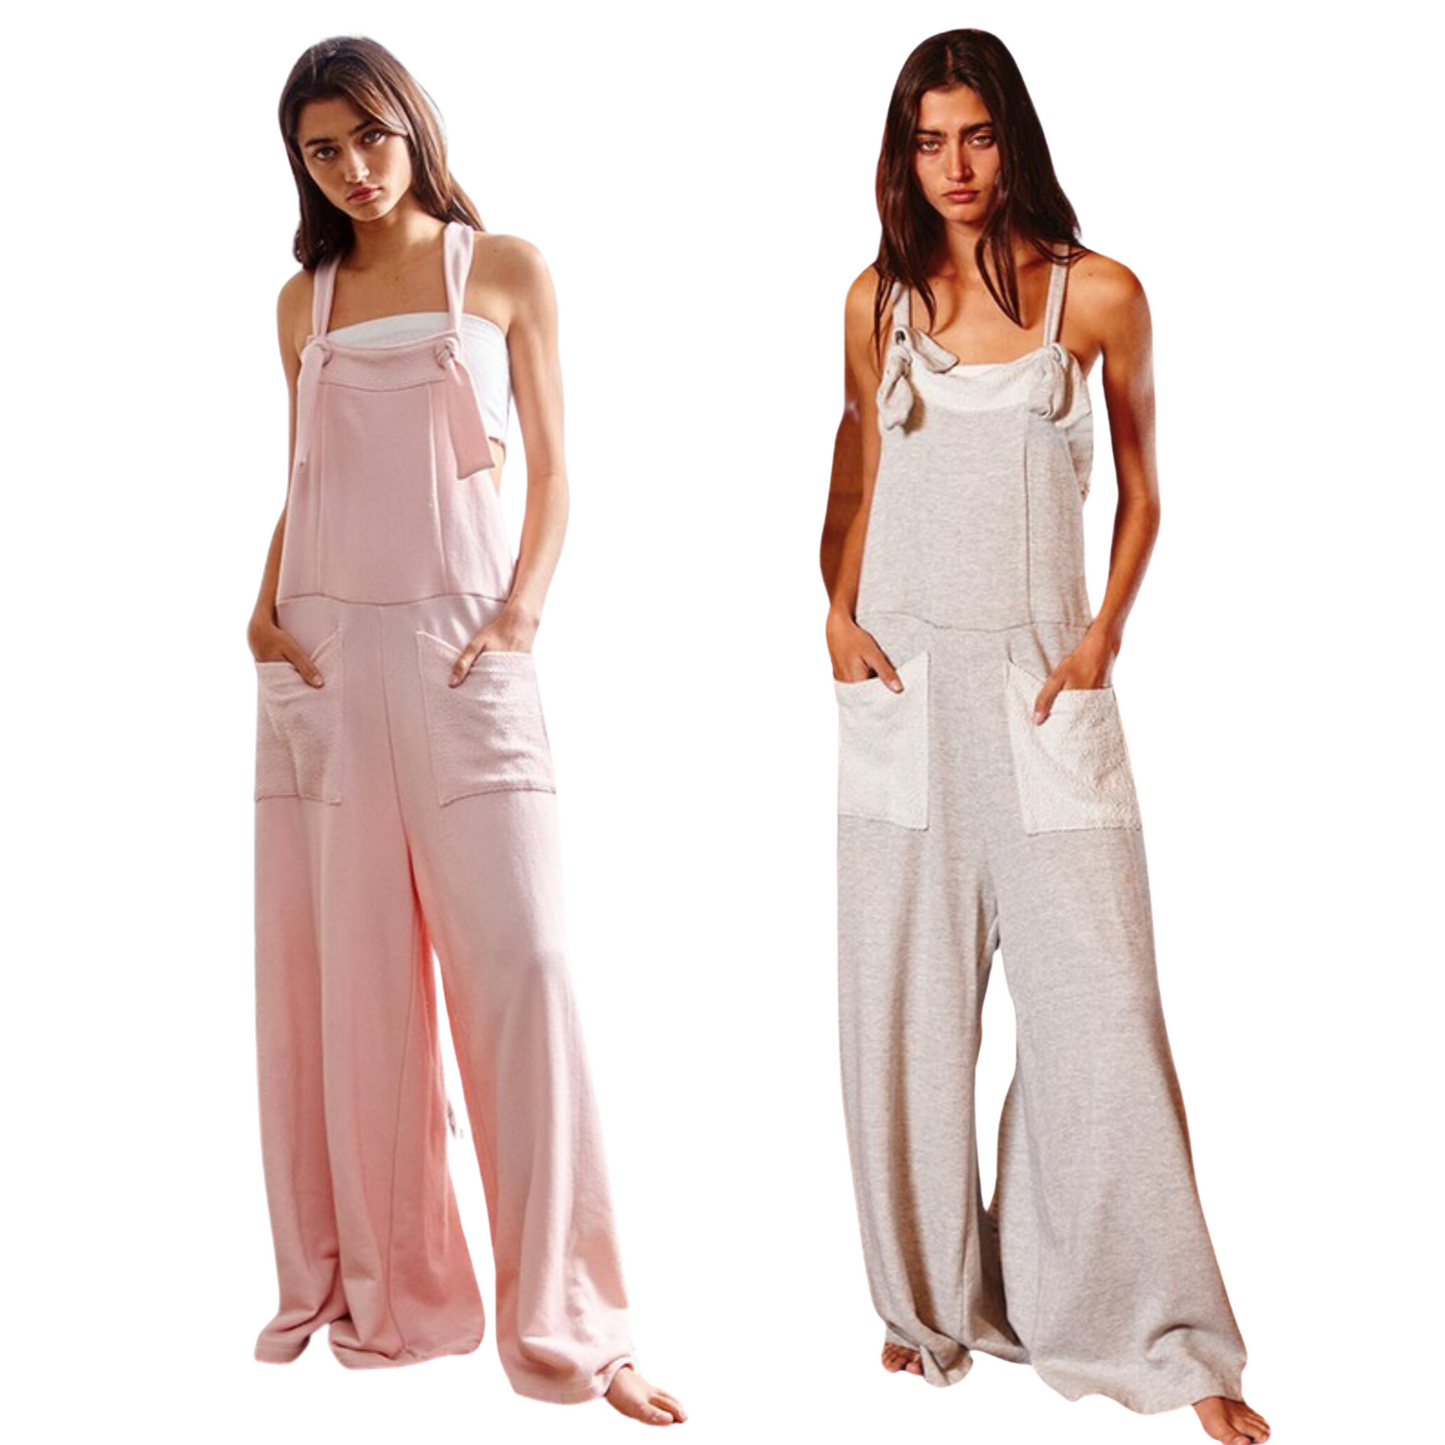 Made with an adjustable sweater material, this chic jumpsuit offers a snug and adjustable fit while featuring two convenient pockets. Available in two colors, pink and grey, this one-piece is ideal for any event. This stylish jumpsuit features adjustable straps, a straight neckline, wide legs, and front pockets for extra storage.